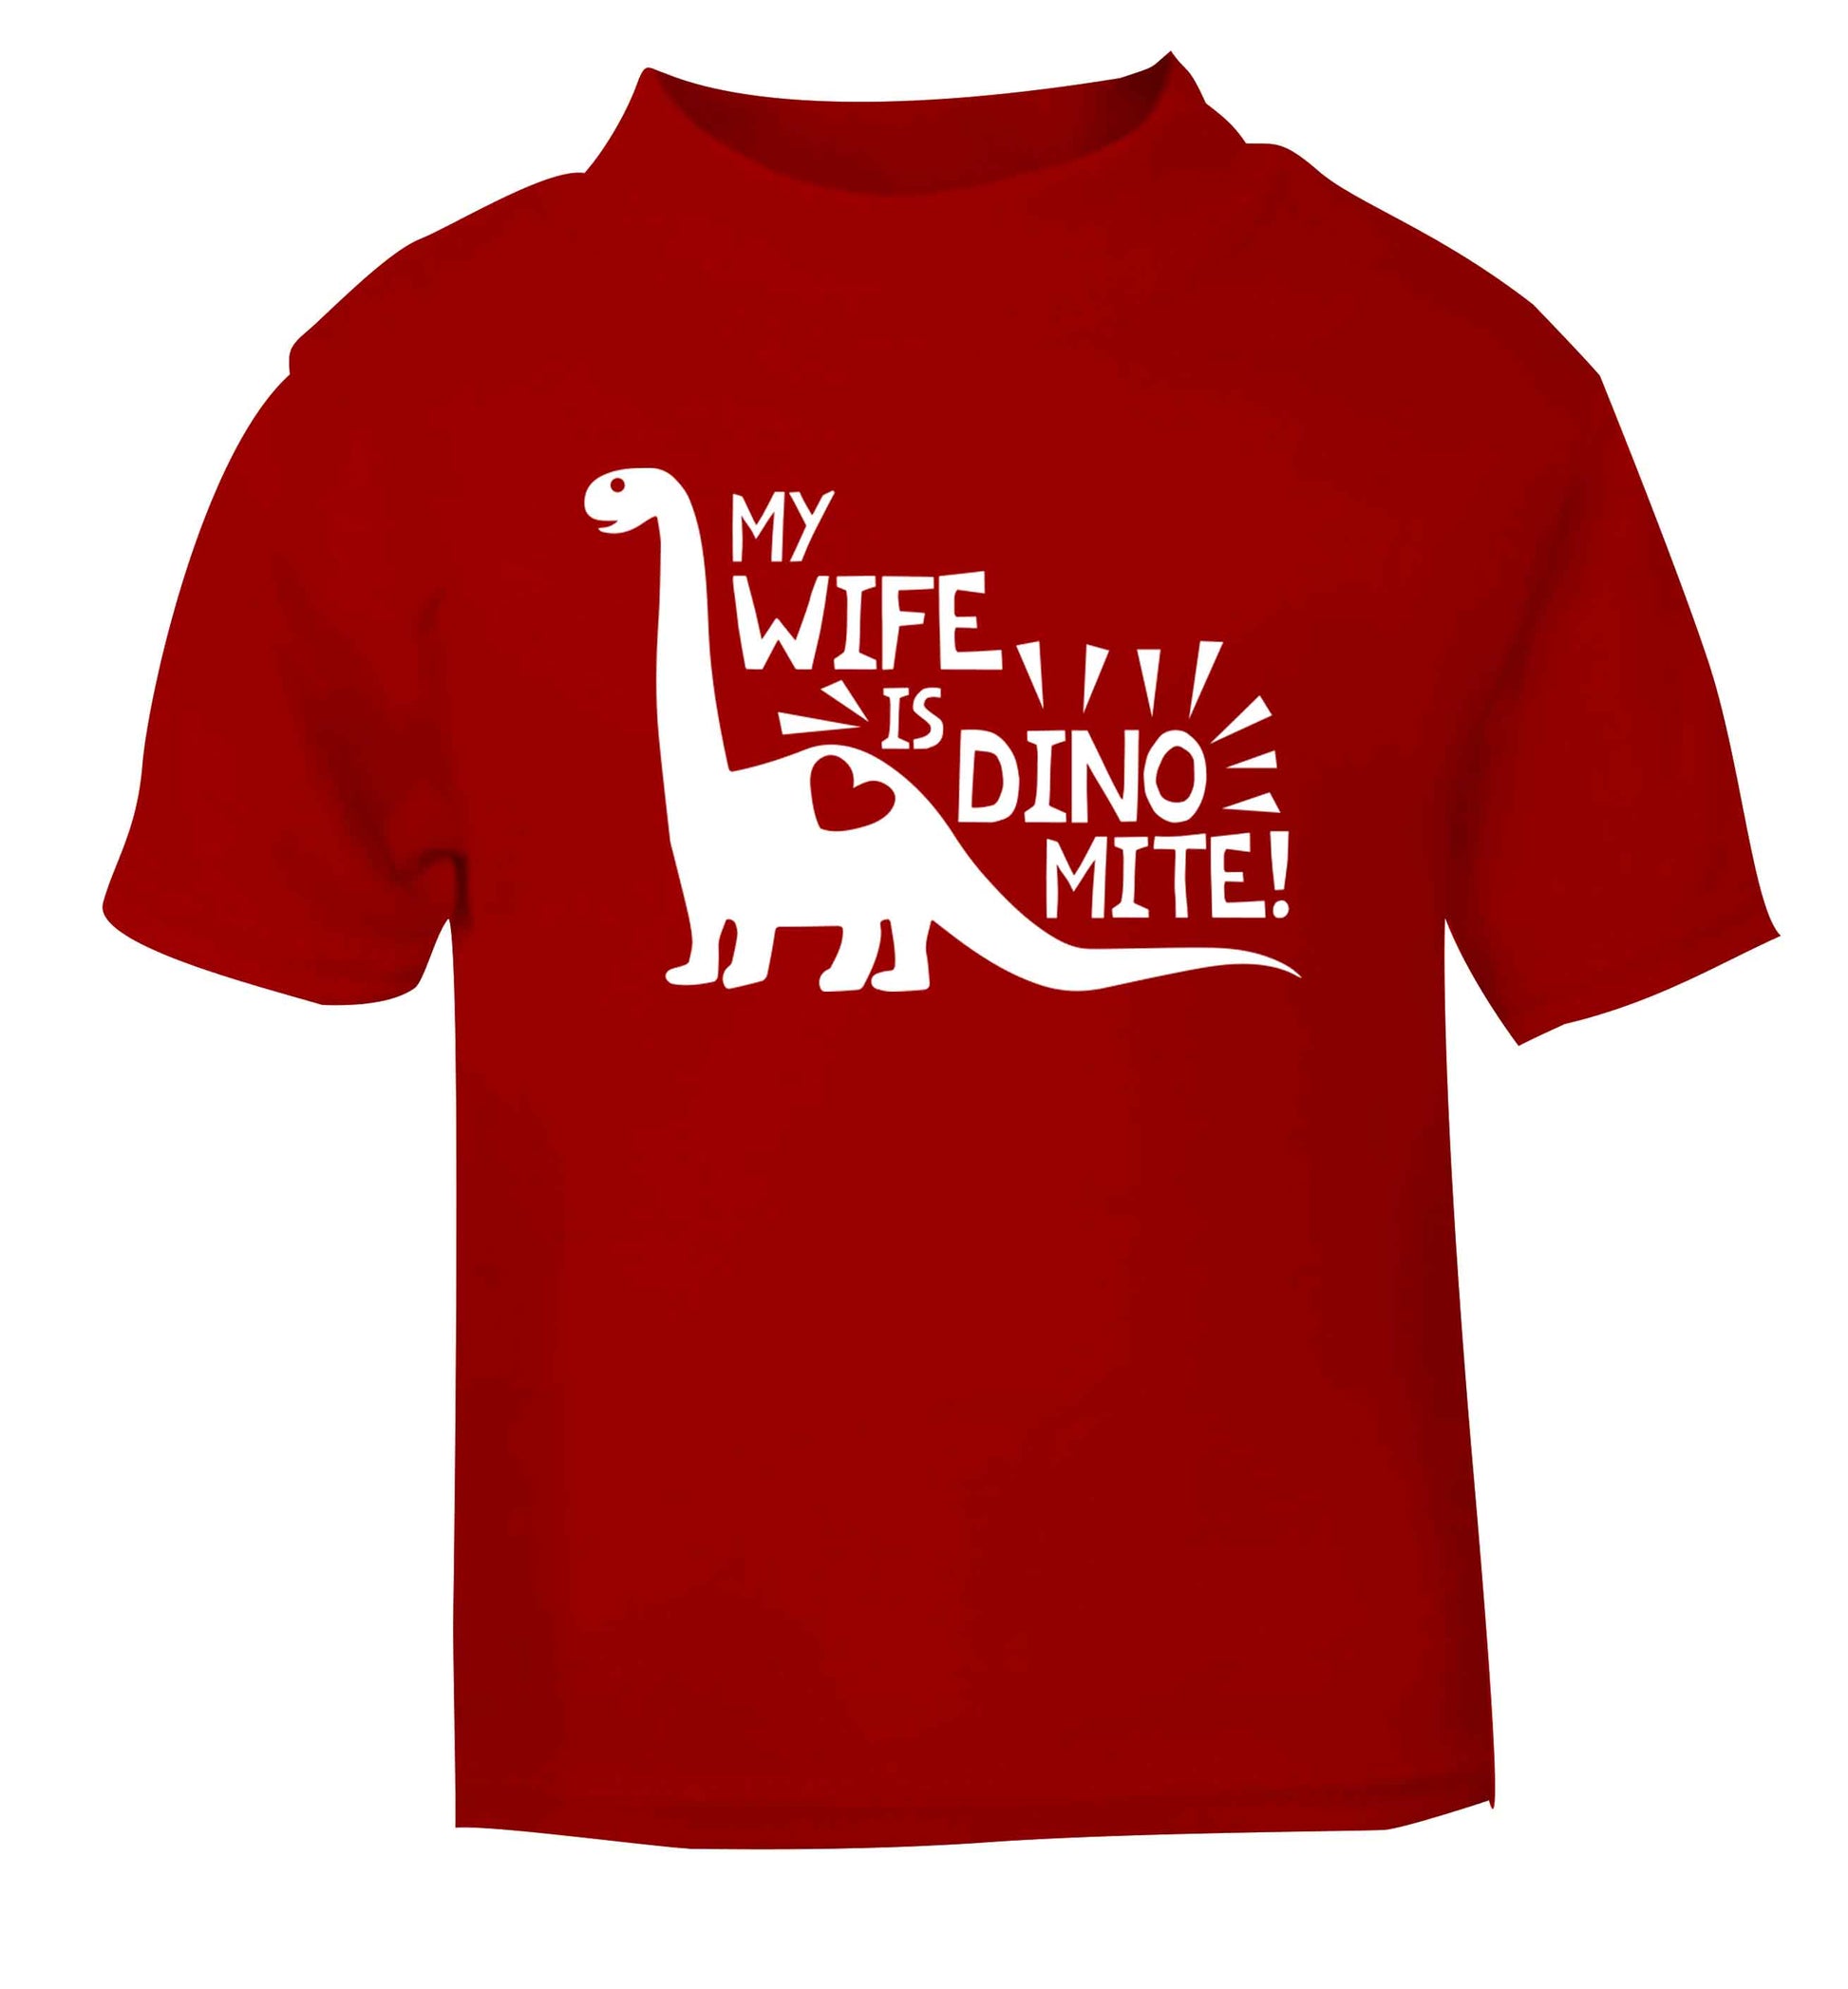 My wife is dinomite! red Baby Toddler Tshirt 2 Years